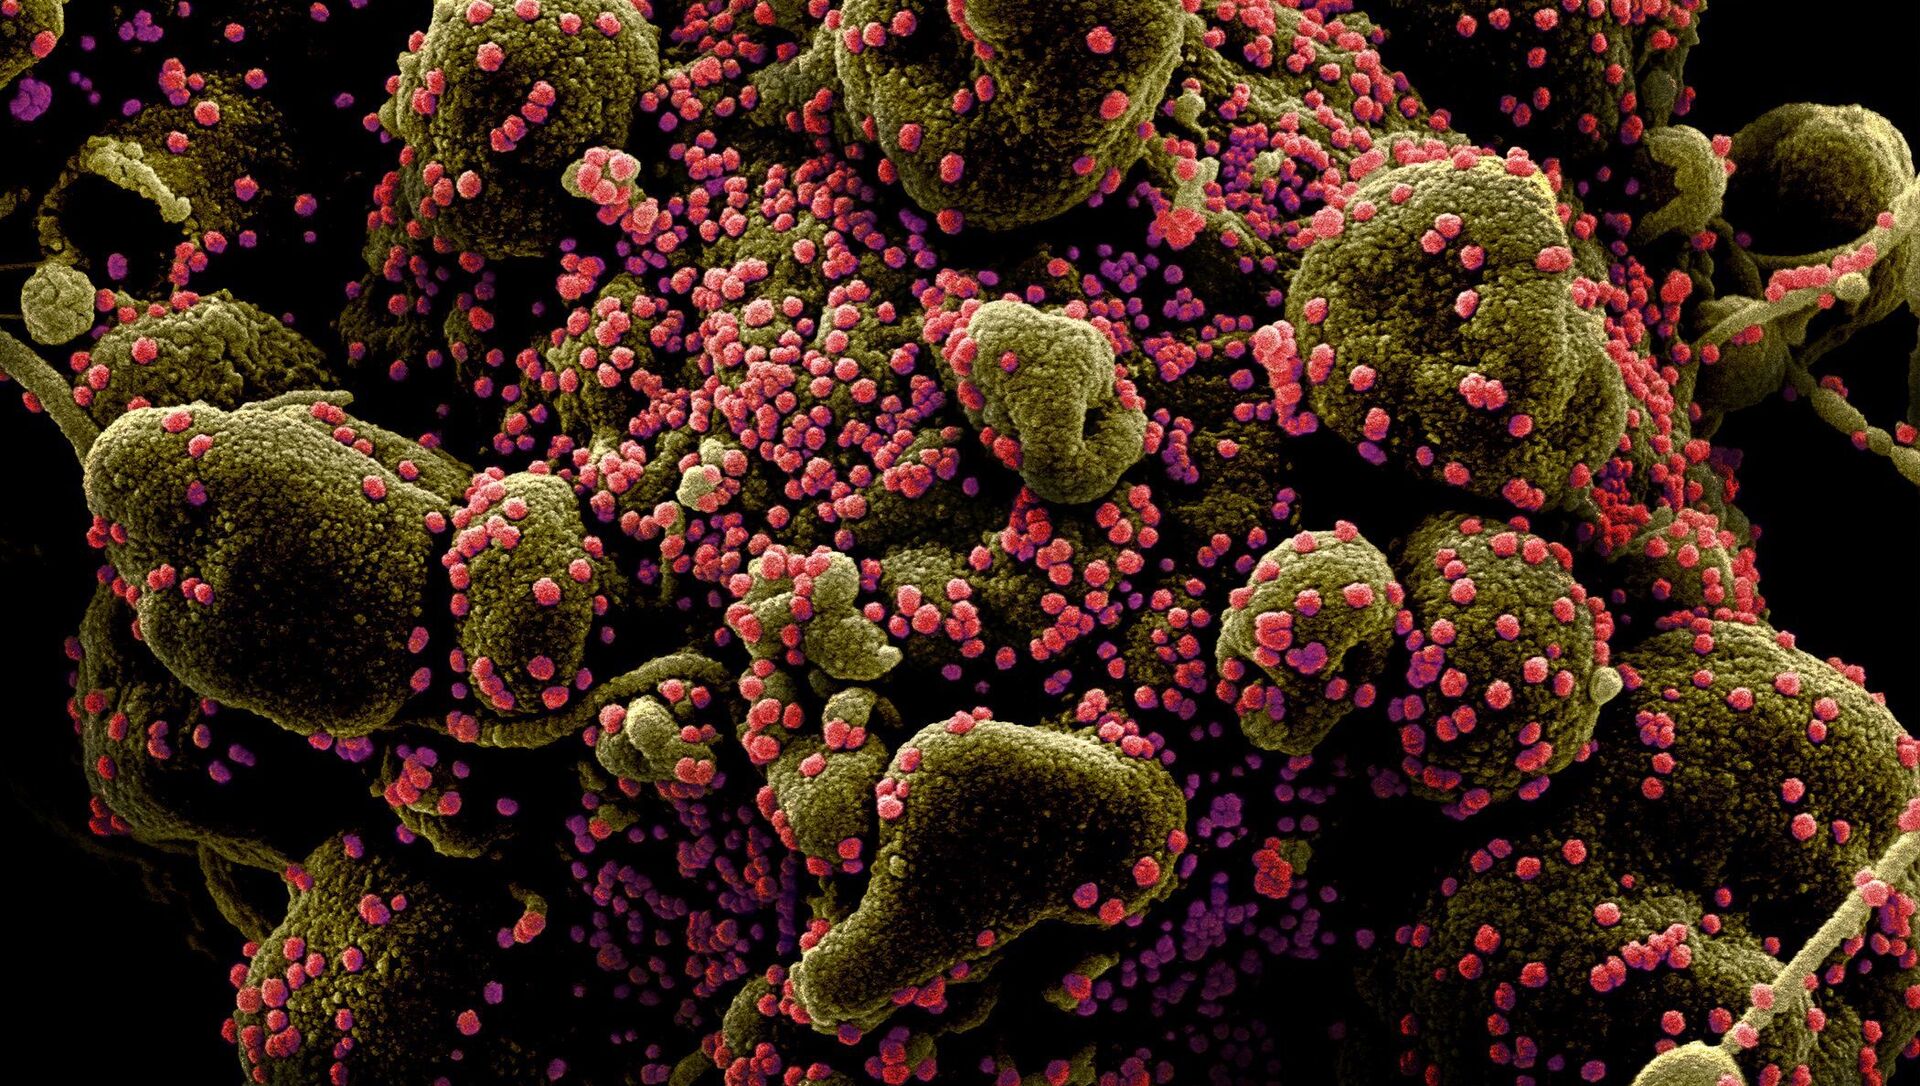 Colorized scanning electron micrograph of an apoptotic cell (greenish brown) heavily infected with SARS-COV-2 virus particles (pink), also known as novel coronavirus, isolated from a patient sample. Image captured and color-enhanced at the NIAID Integrated Research Facility (IRF) in Fort Detrick, Maryland.  - Sputnik International, 1920, 15.02.2021